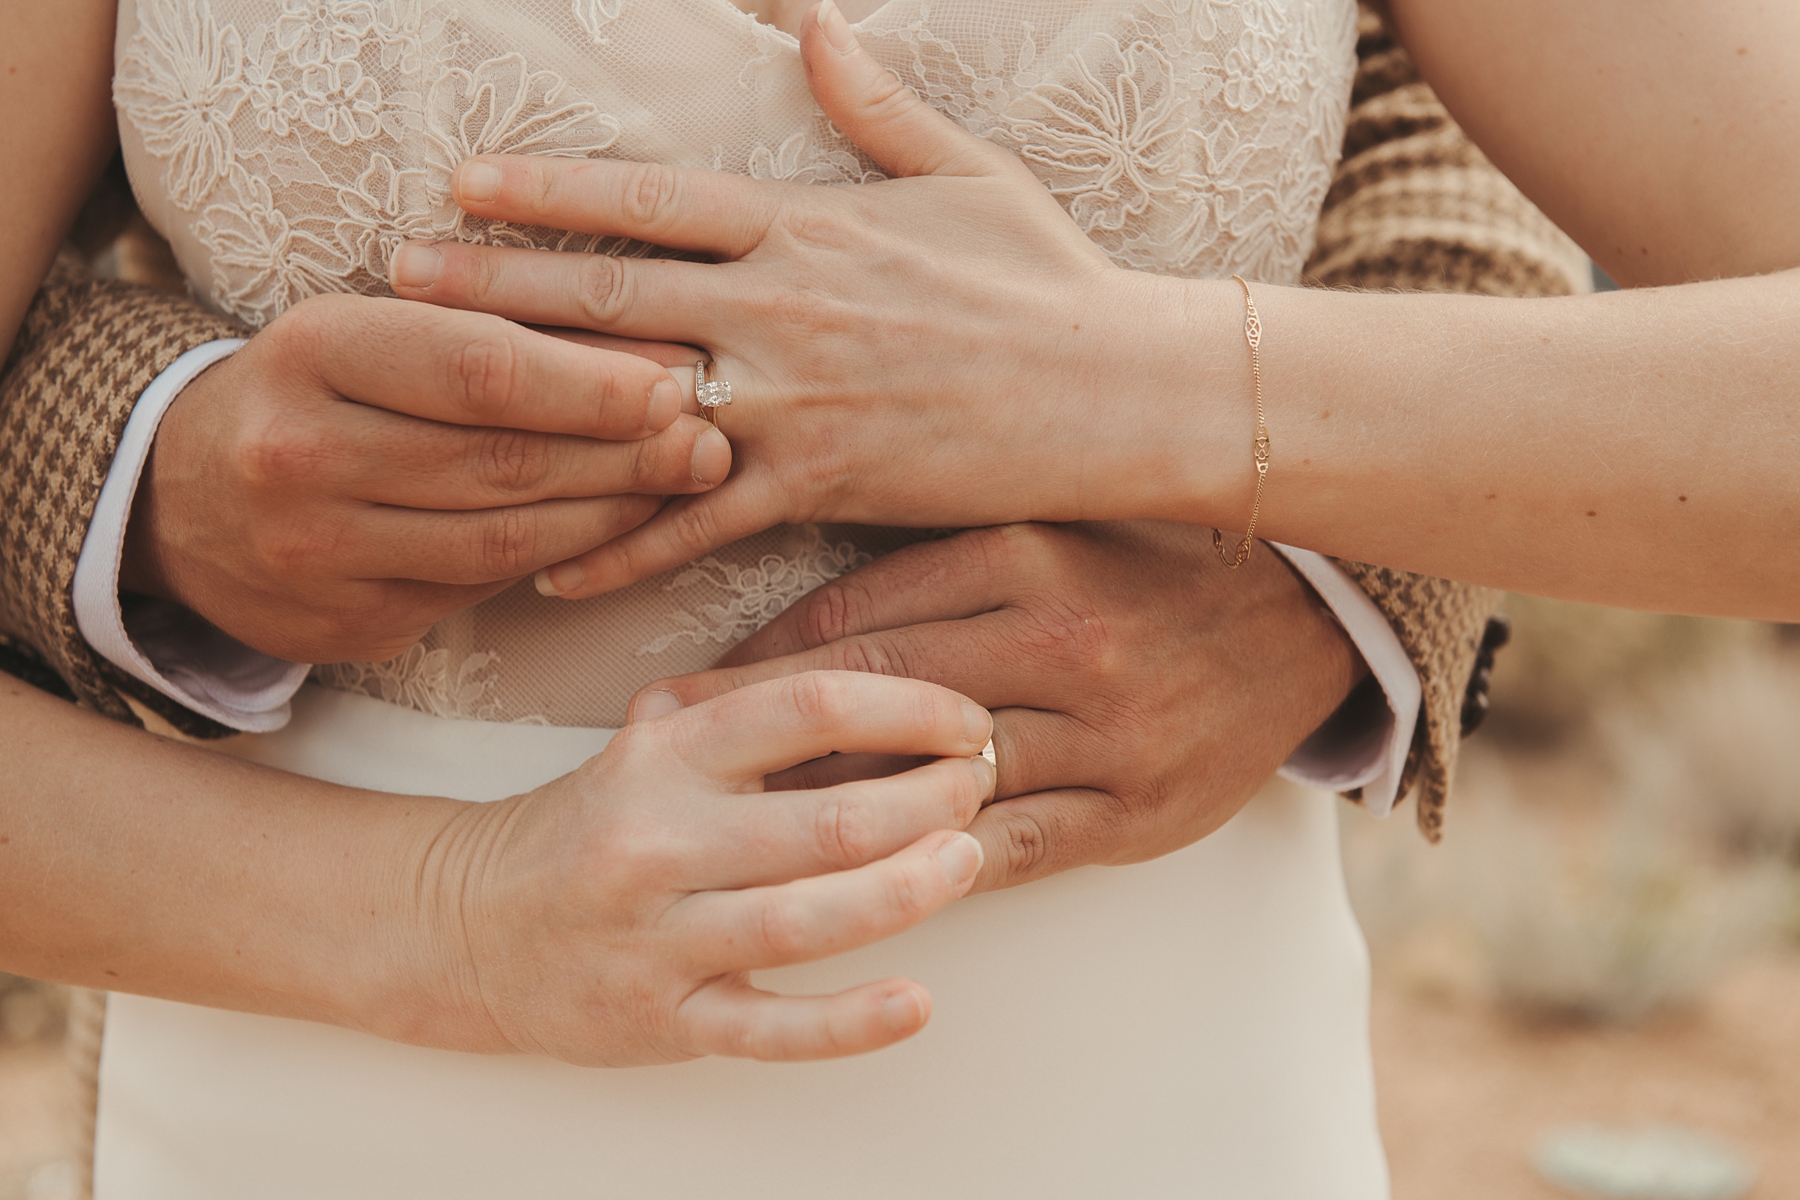 Groom standing behind bride with arms around her while they hold each other's rings